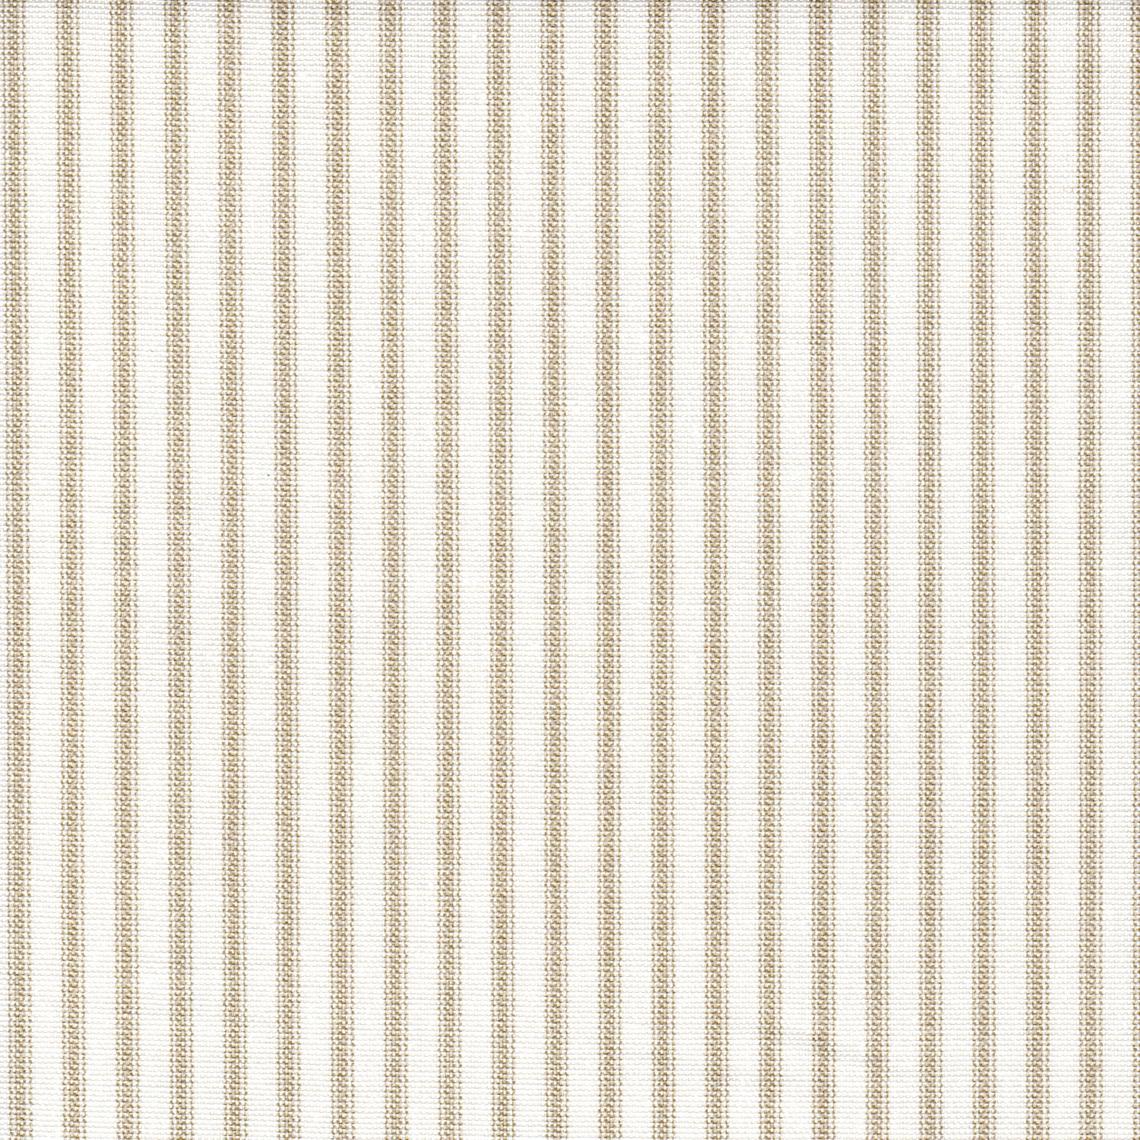 tie-up valance in farmhouse sand beige traditional ticking stripe